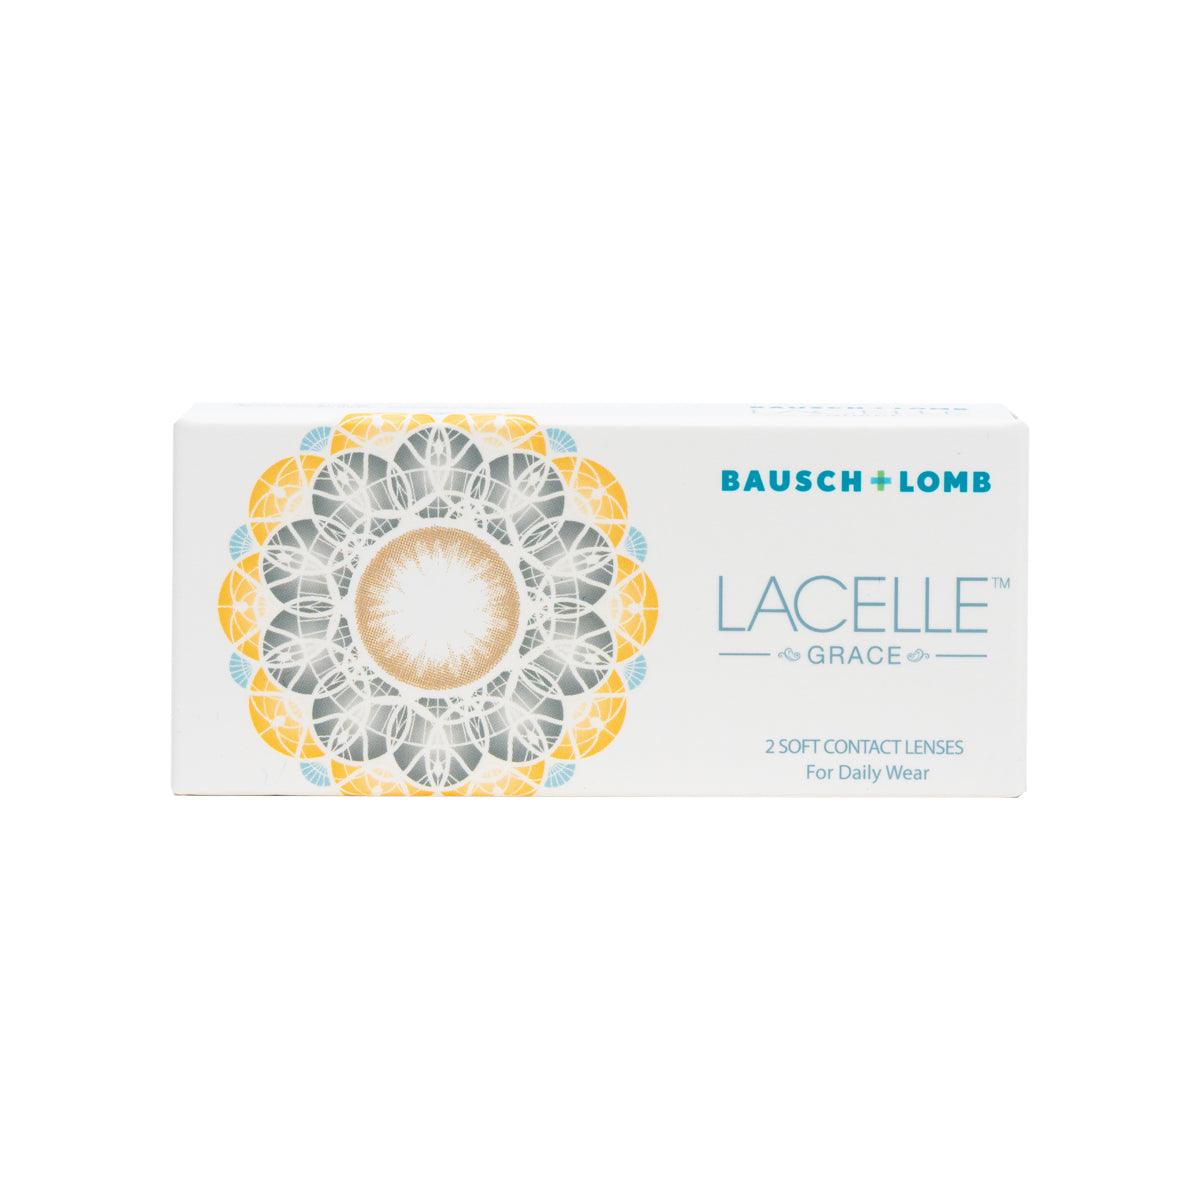 Bausch + Lomb Lacelle Grace Twinkle Brown - TA-TO.com